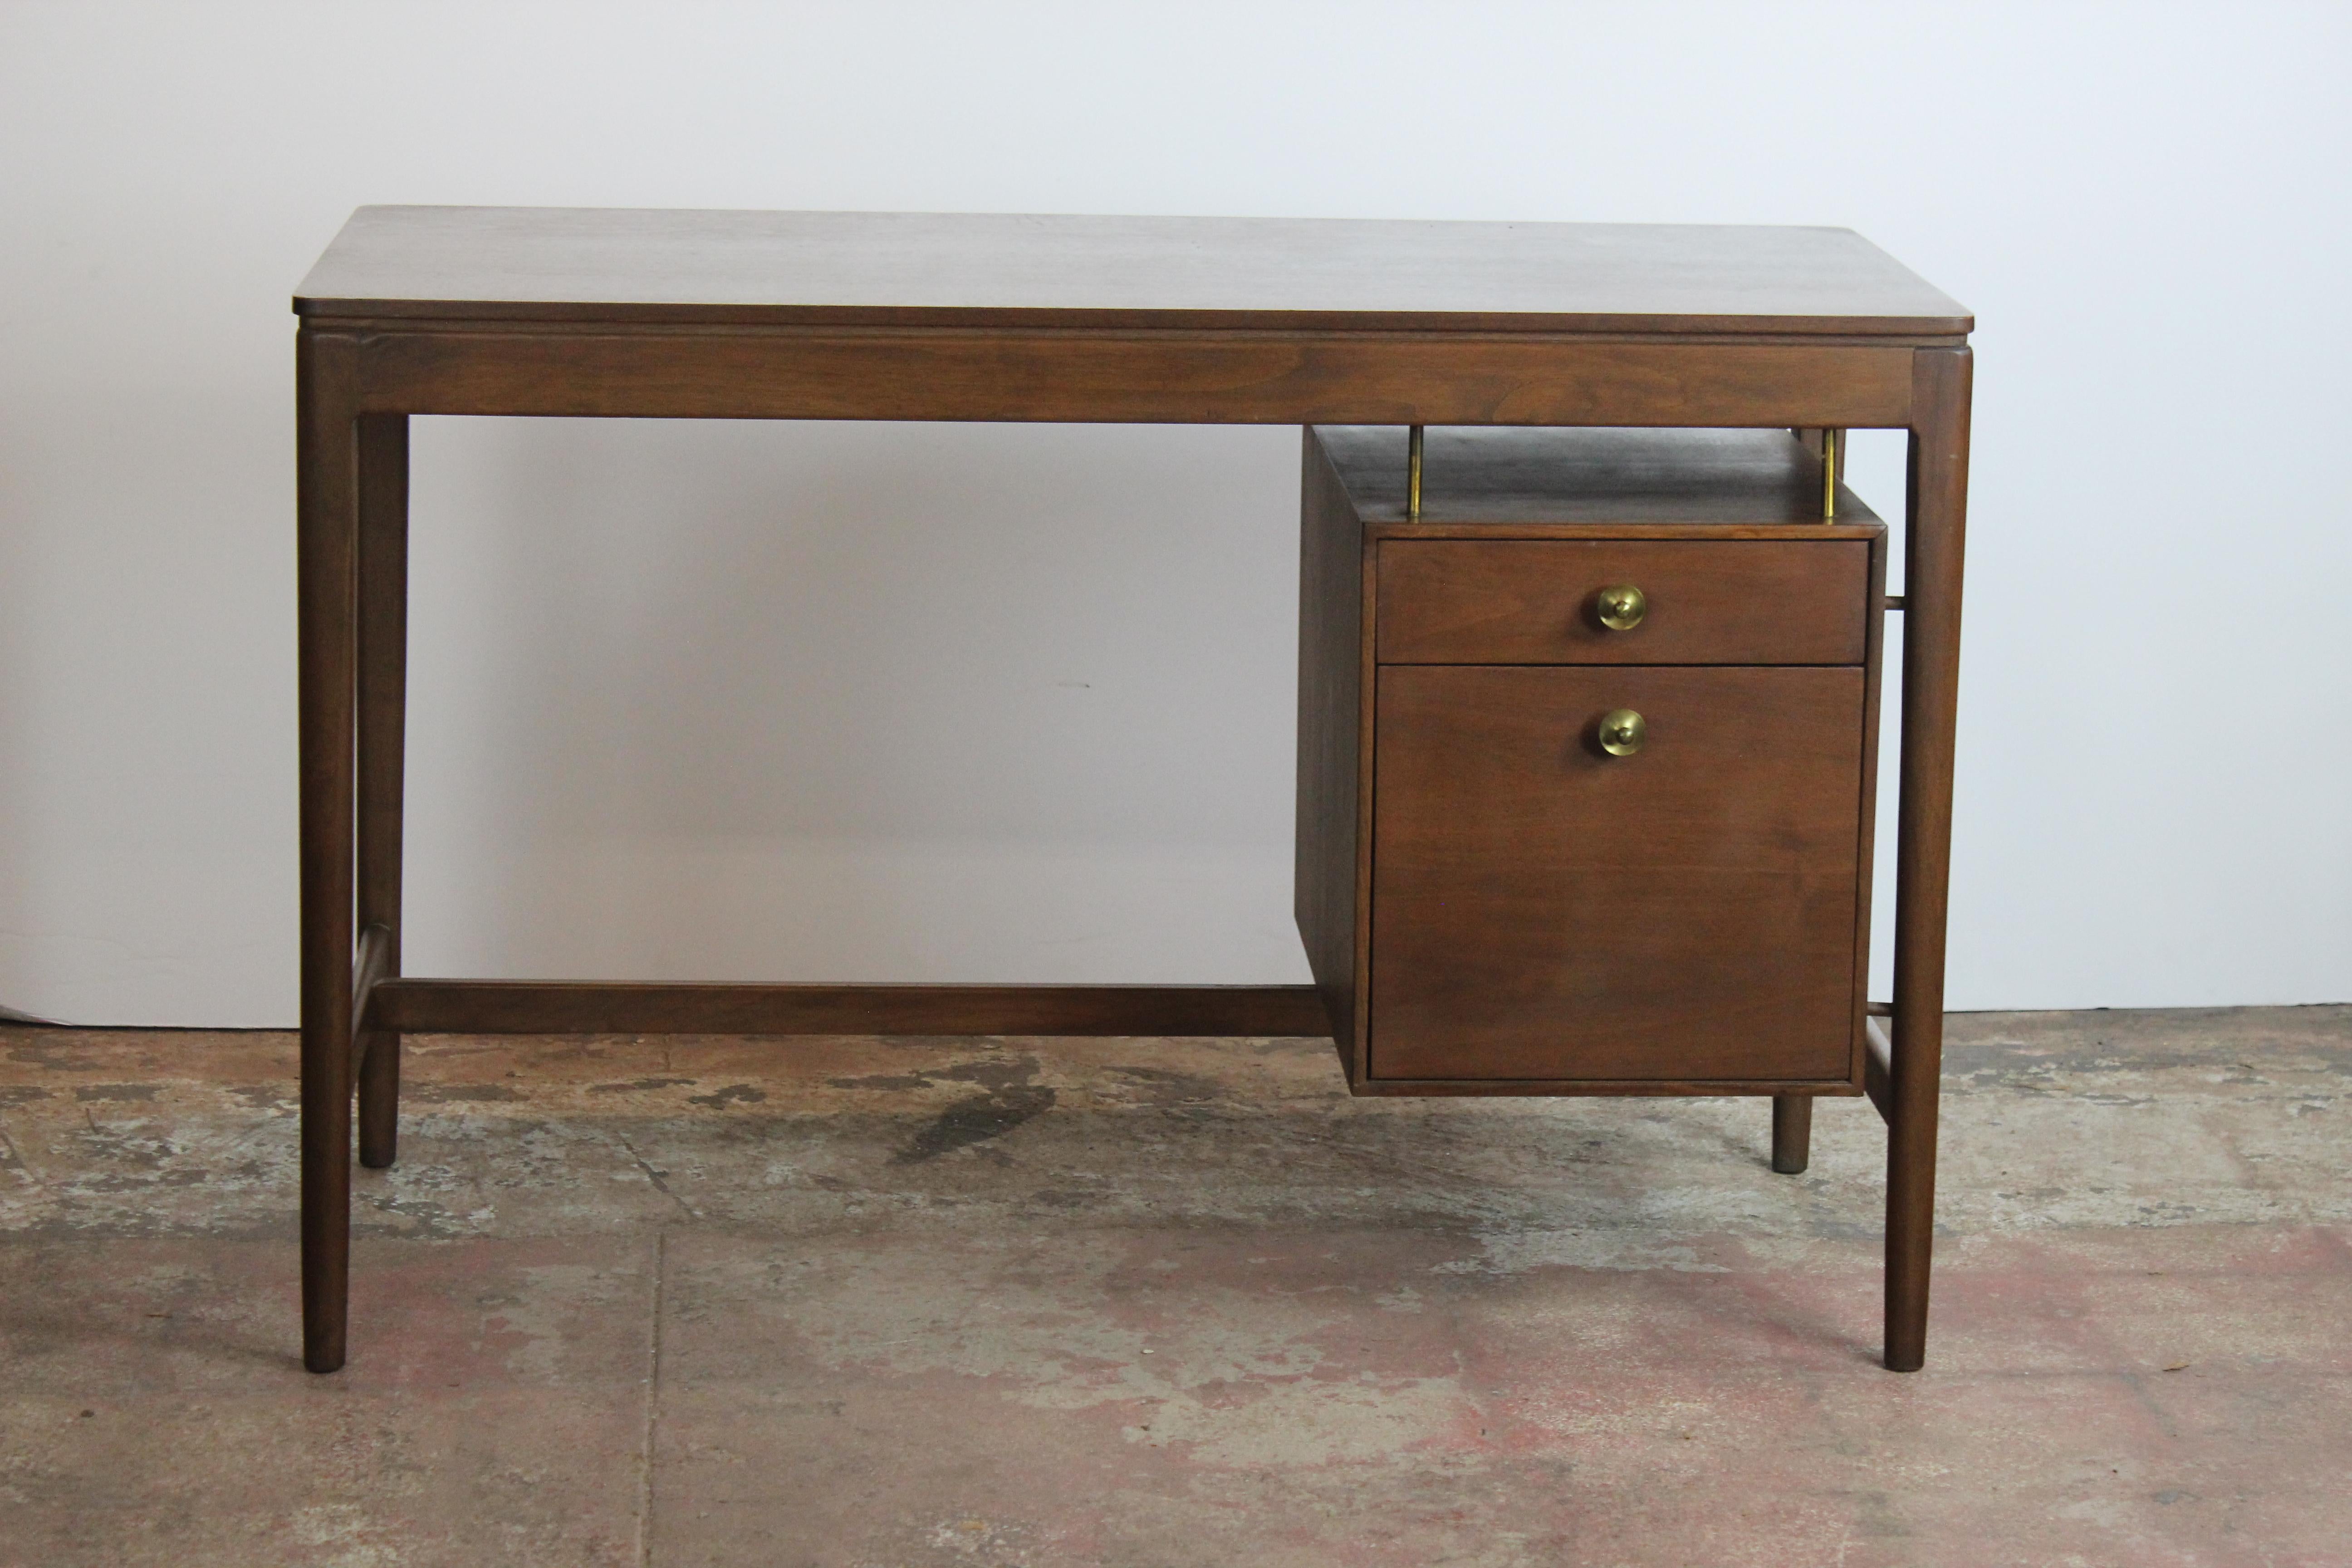 American Midcentury Desk and Chair